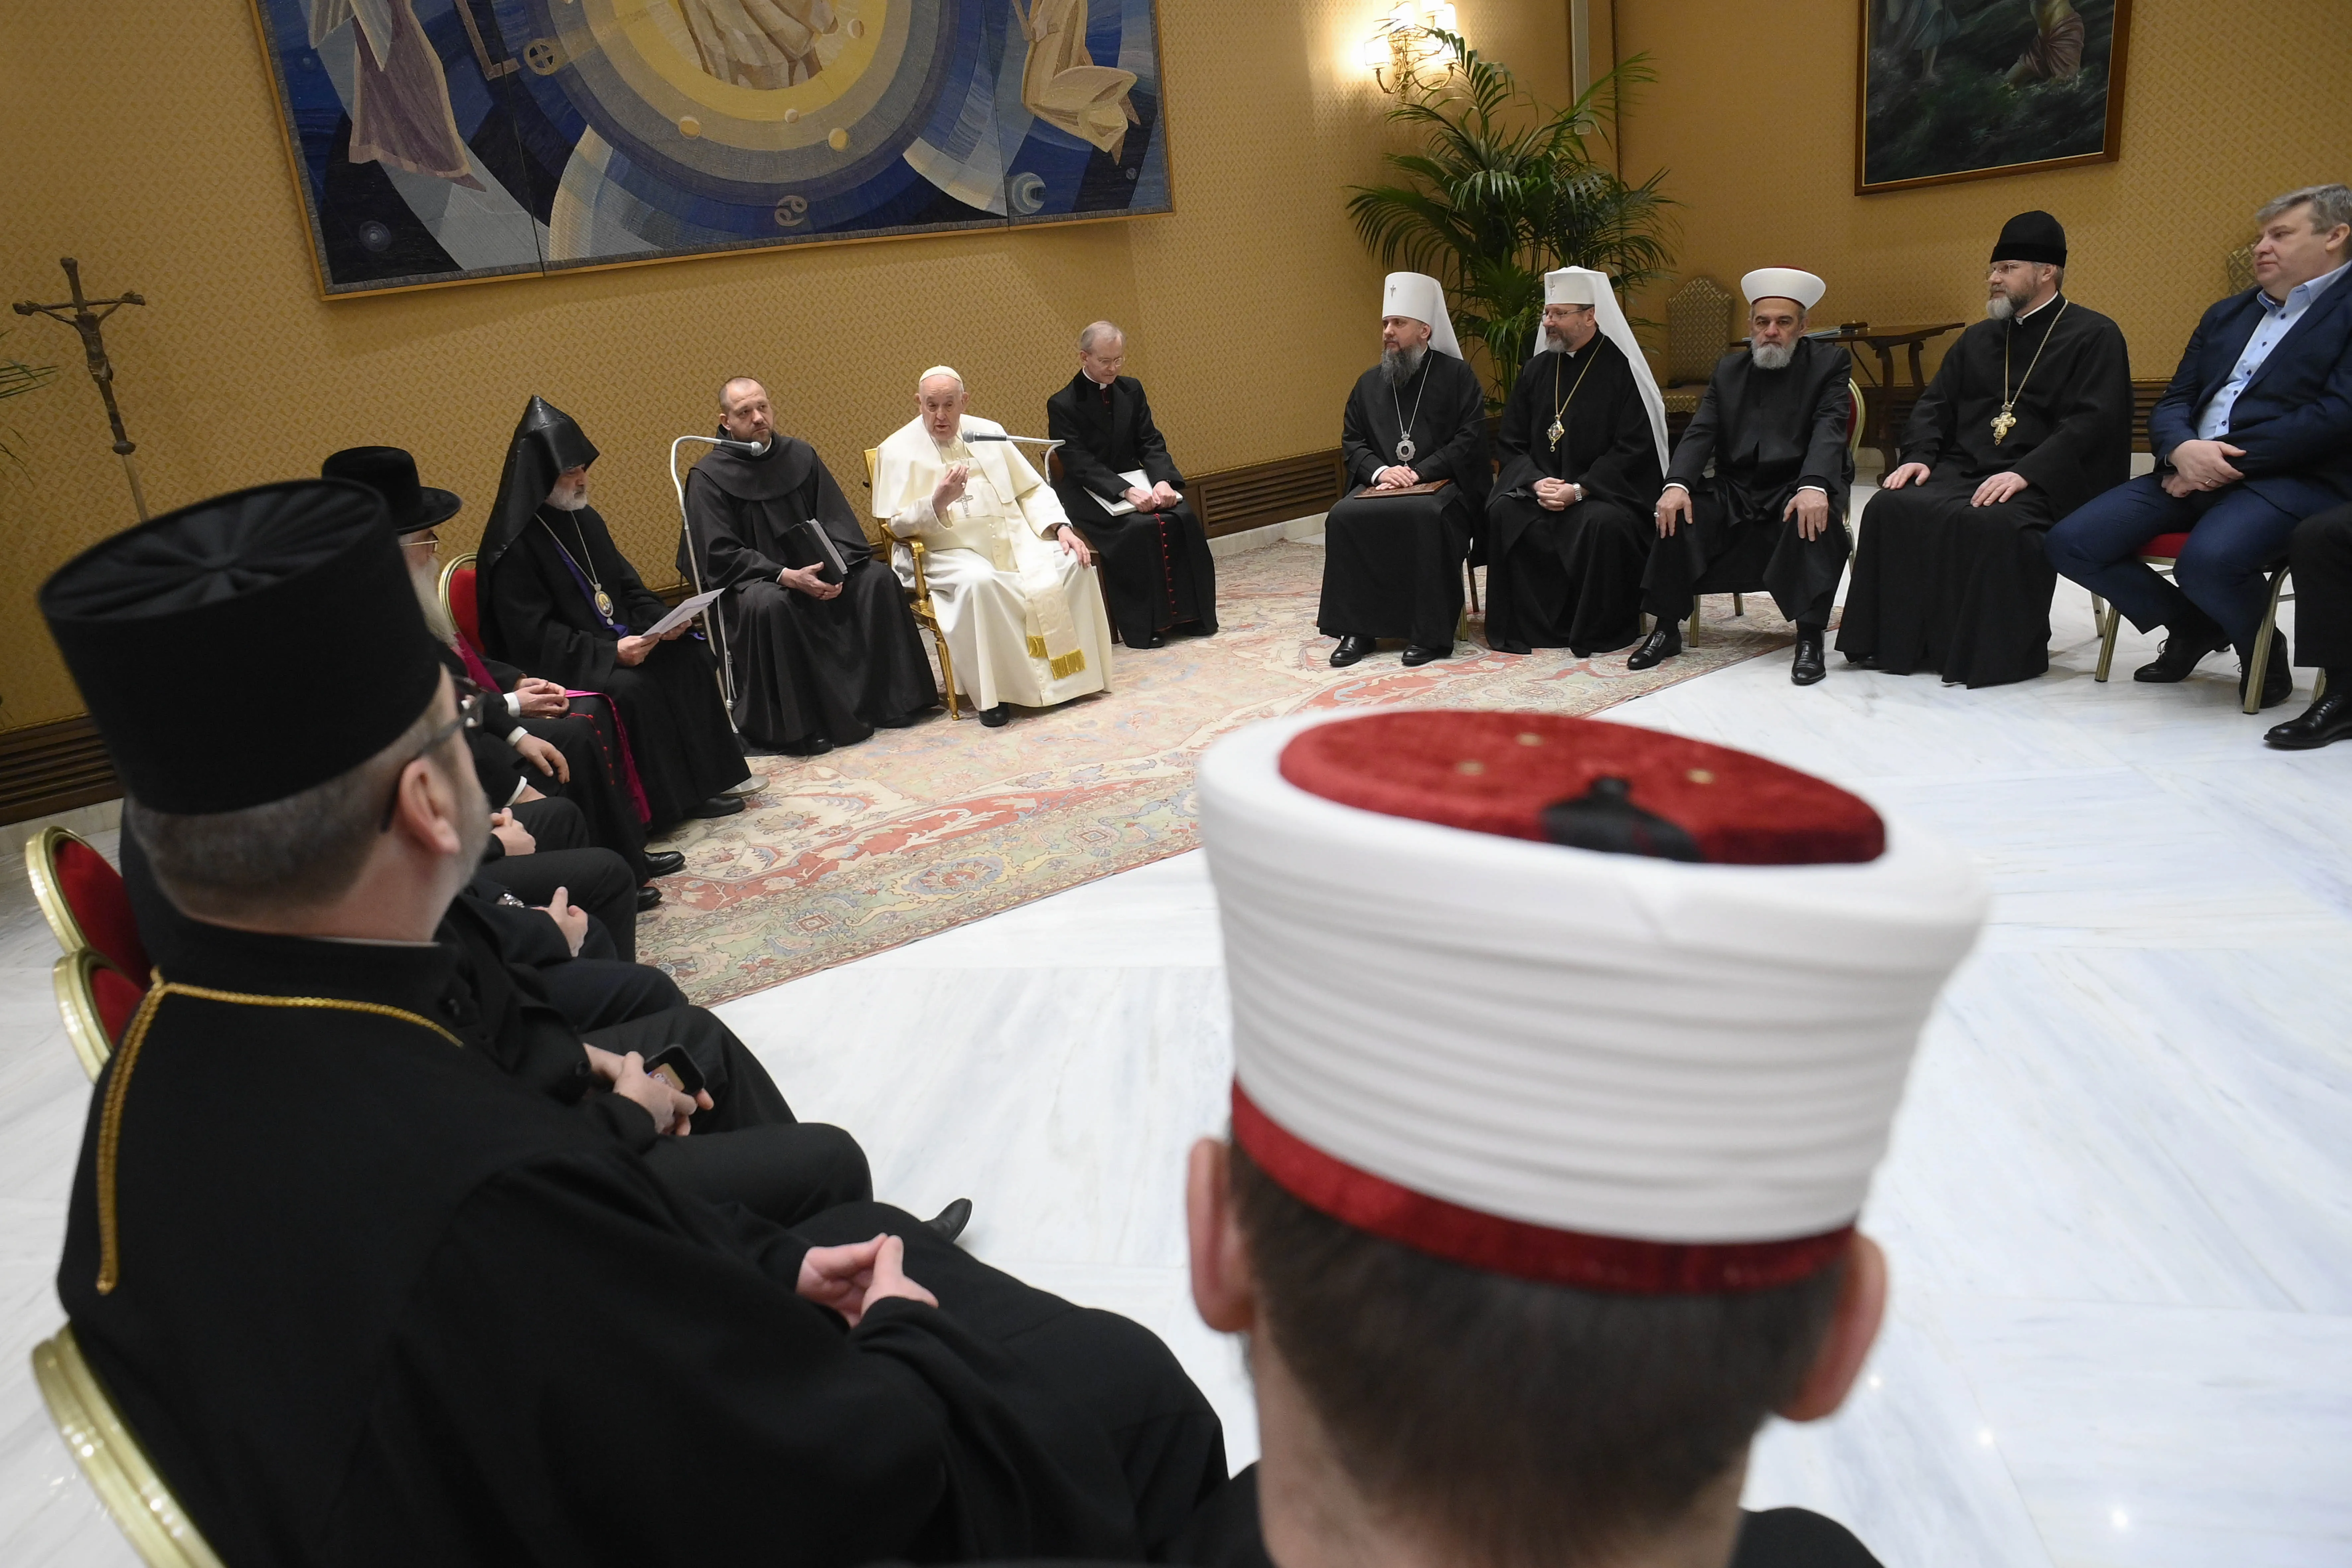 Pope Francis meets with the Ukrainian Council of Churches and Religious Organizations on Jan. 25, 2023, at the Vatican.?w=200&h=150